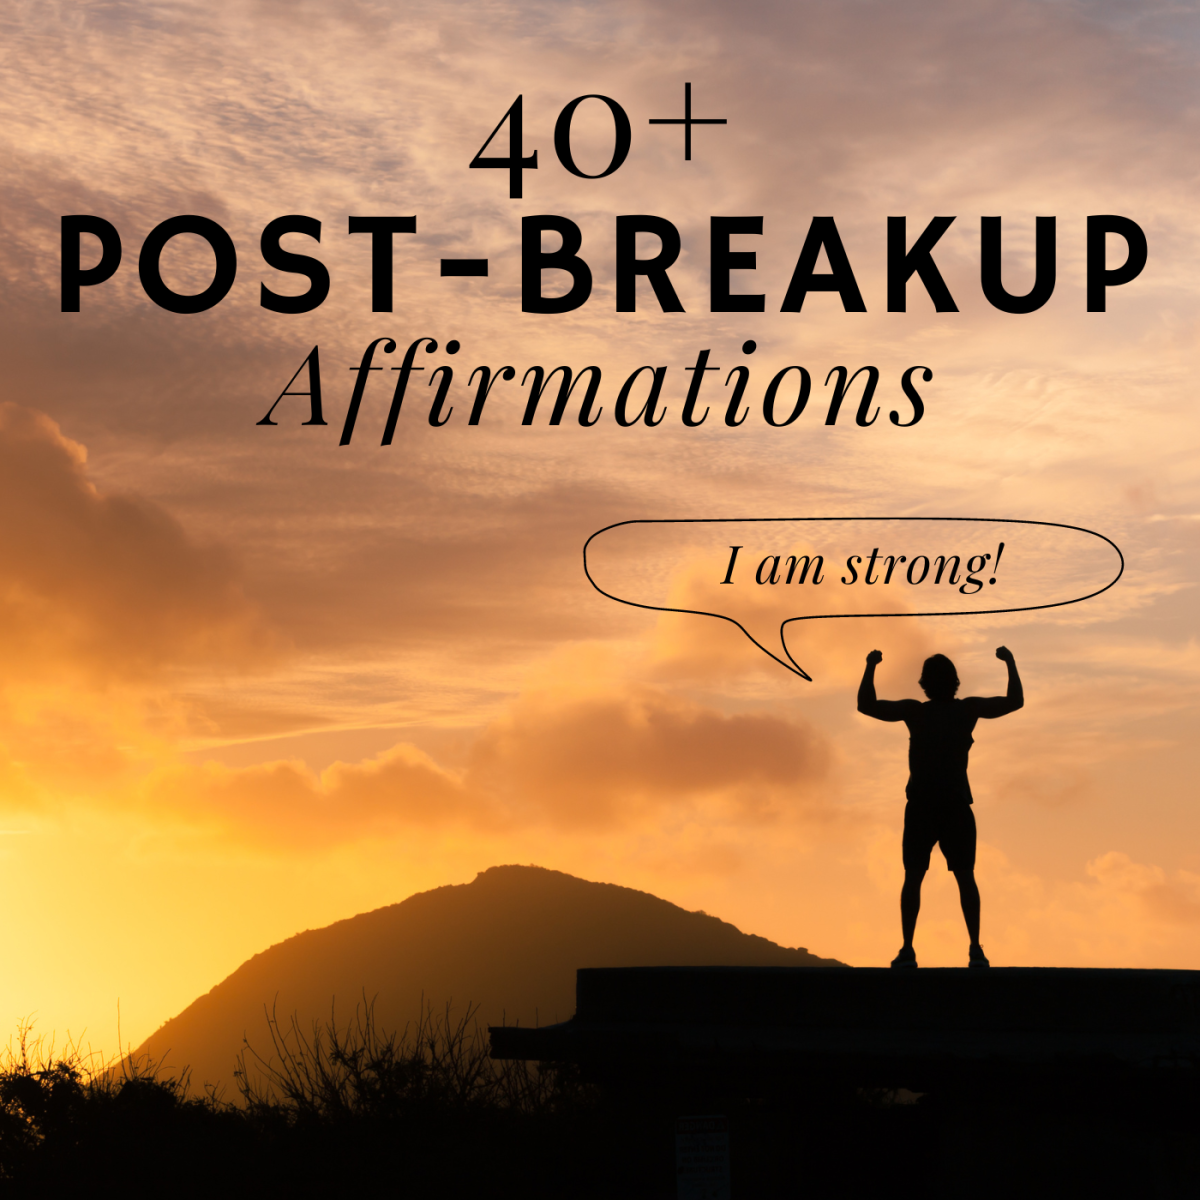 50 Positive Breakup Affirmations to Help You Heal